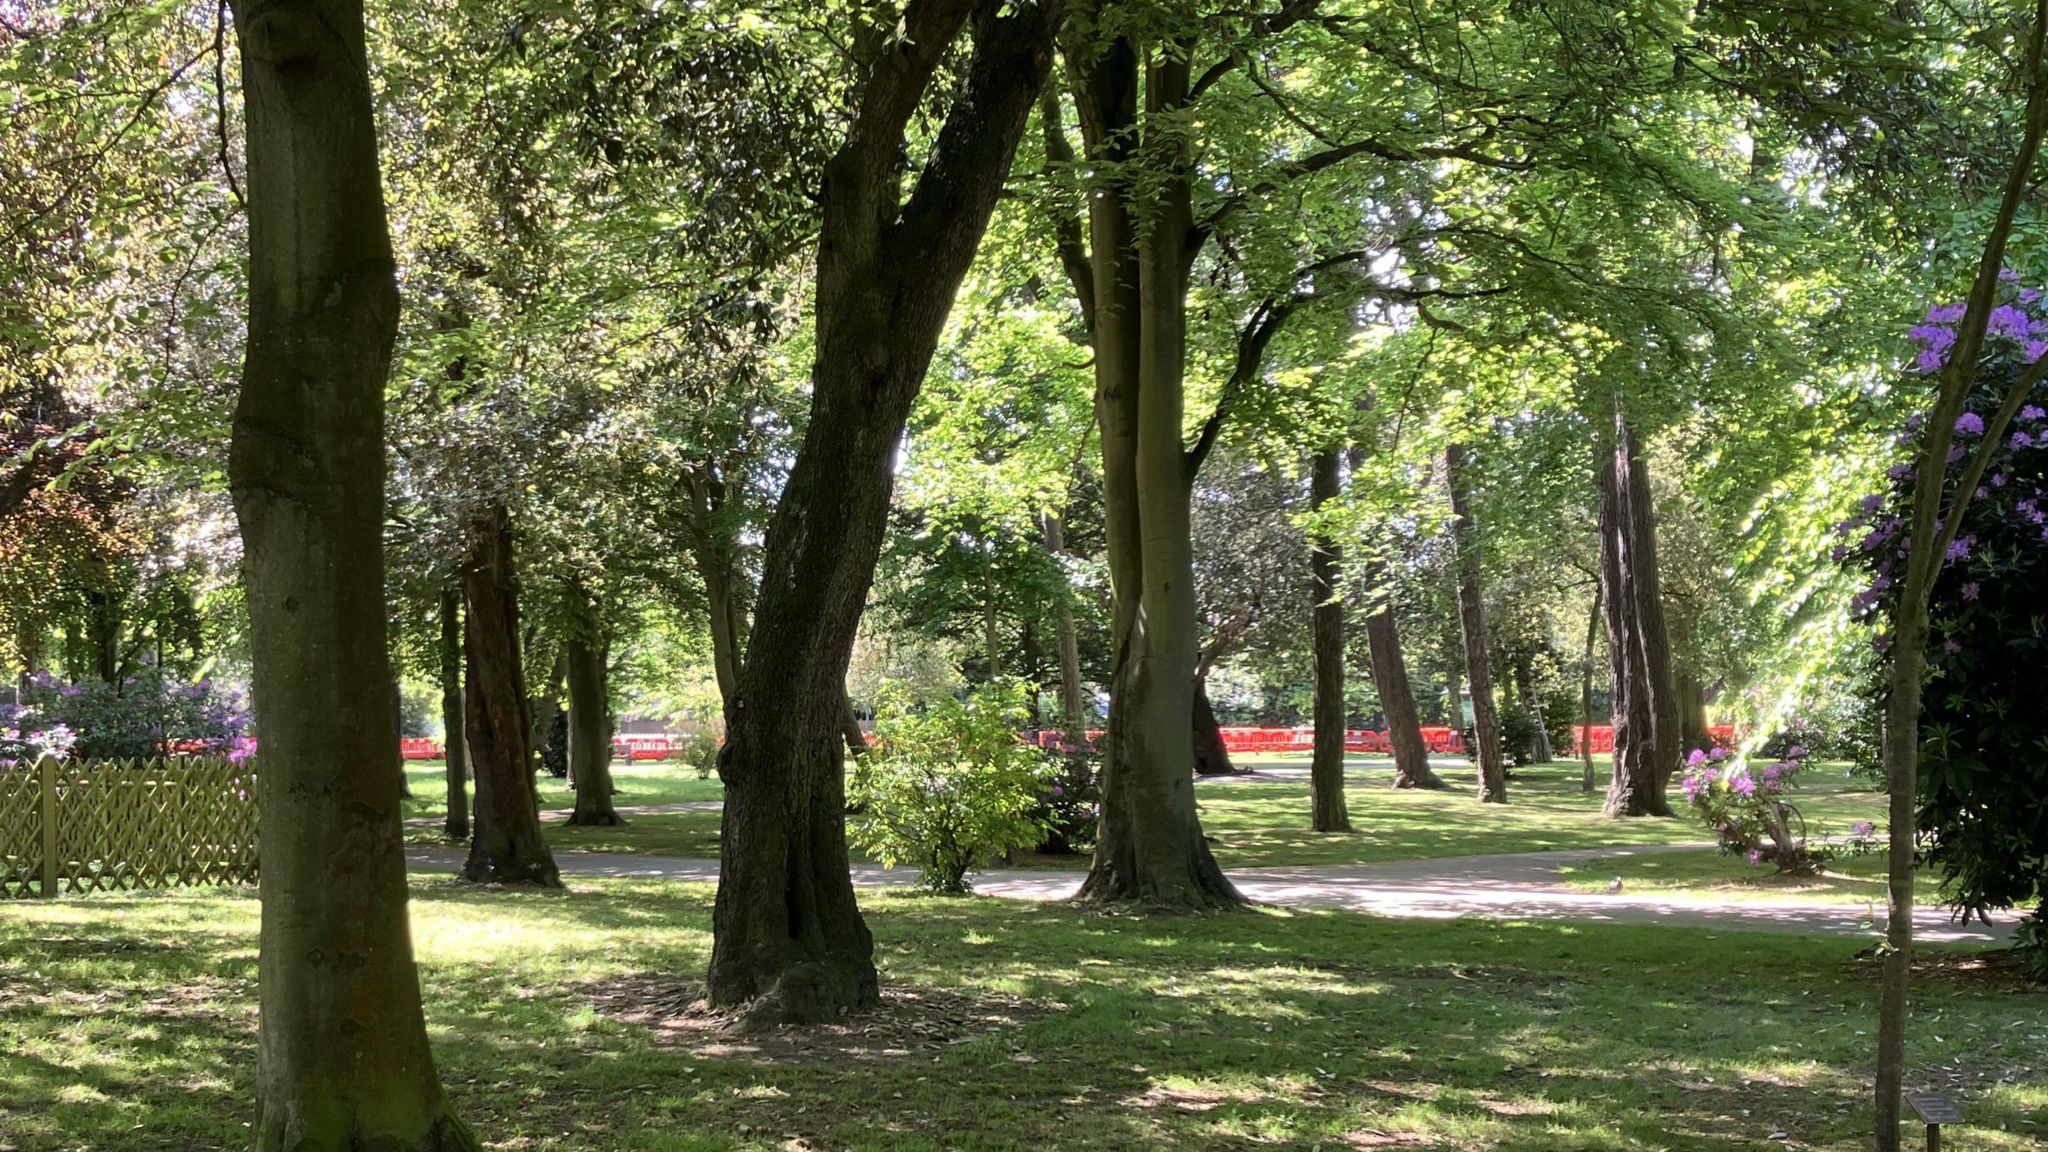 Trees and bushes in dappled sunlight in the park 